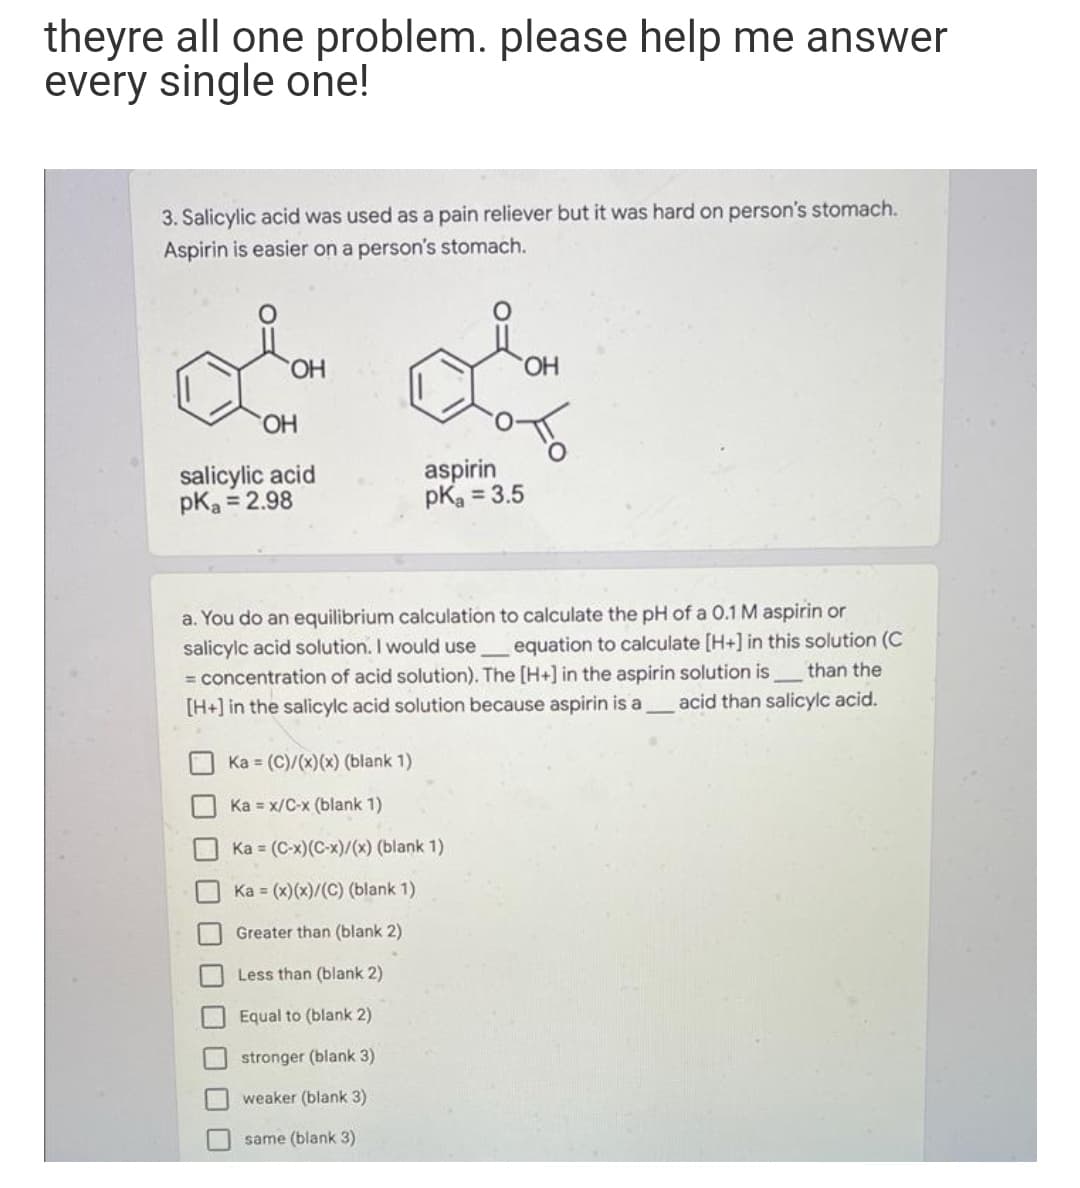 theyre all one problem. please help me answer
every single one!
3. Salicylic acid was used as a pain reliever but it was hard on person's stomach.
Aspirin is easier on a person's stomach.
HO.
HO.
HO.
salicylic acid
pKa = 2.98
aspirin
pKa = 3.5
a. You do an equilibrium calculation to calculate the pH of a 0.1 M aspirin or
salicylc acid solution. I would use equation to calculate [H+] in this solution (C
= concentration of acid solution). The [H+] in the aspirin solution isthan the
[H+] in the salicylc acid solution because aspirin is a
acid than salicylc acid.
Ka = (C)/(x)(x) (blank 1)
Ka = x/C-x (blank 1)
Ka = (C-x)(C-x)/(x) (blank 1)
Ka = (x)(x)/(C) (blank 1)
Greater than (blank 2)
Less than (blank 2)
Equal to (blank 2)
stronger (blank 3)
weaker (blank 3)
same (blank 3)
口ロ口
